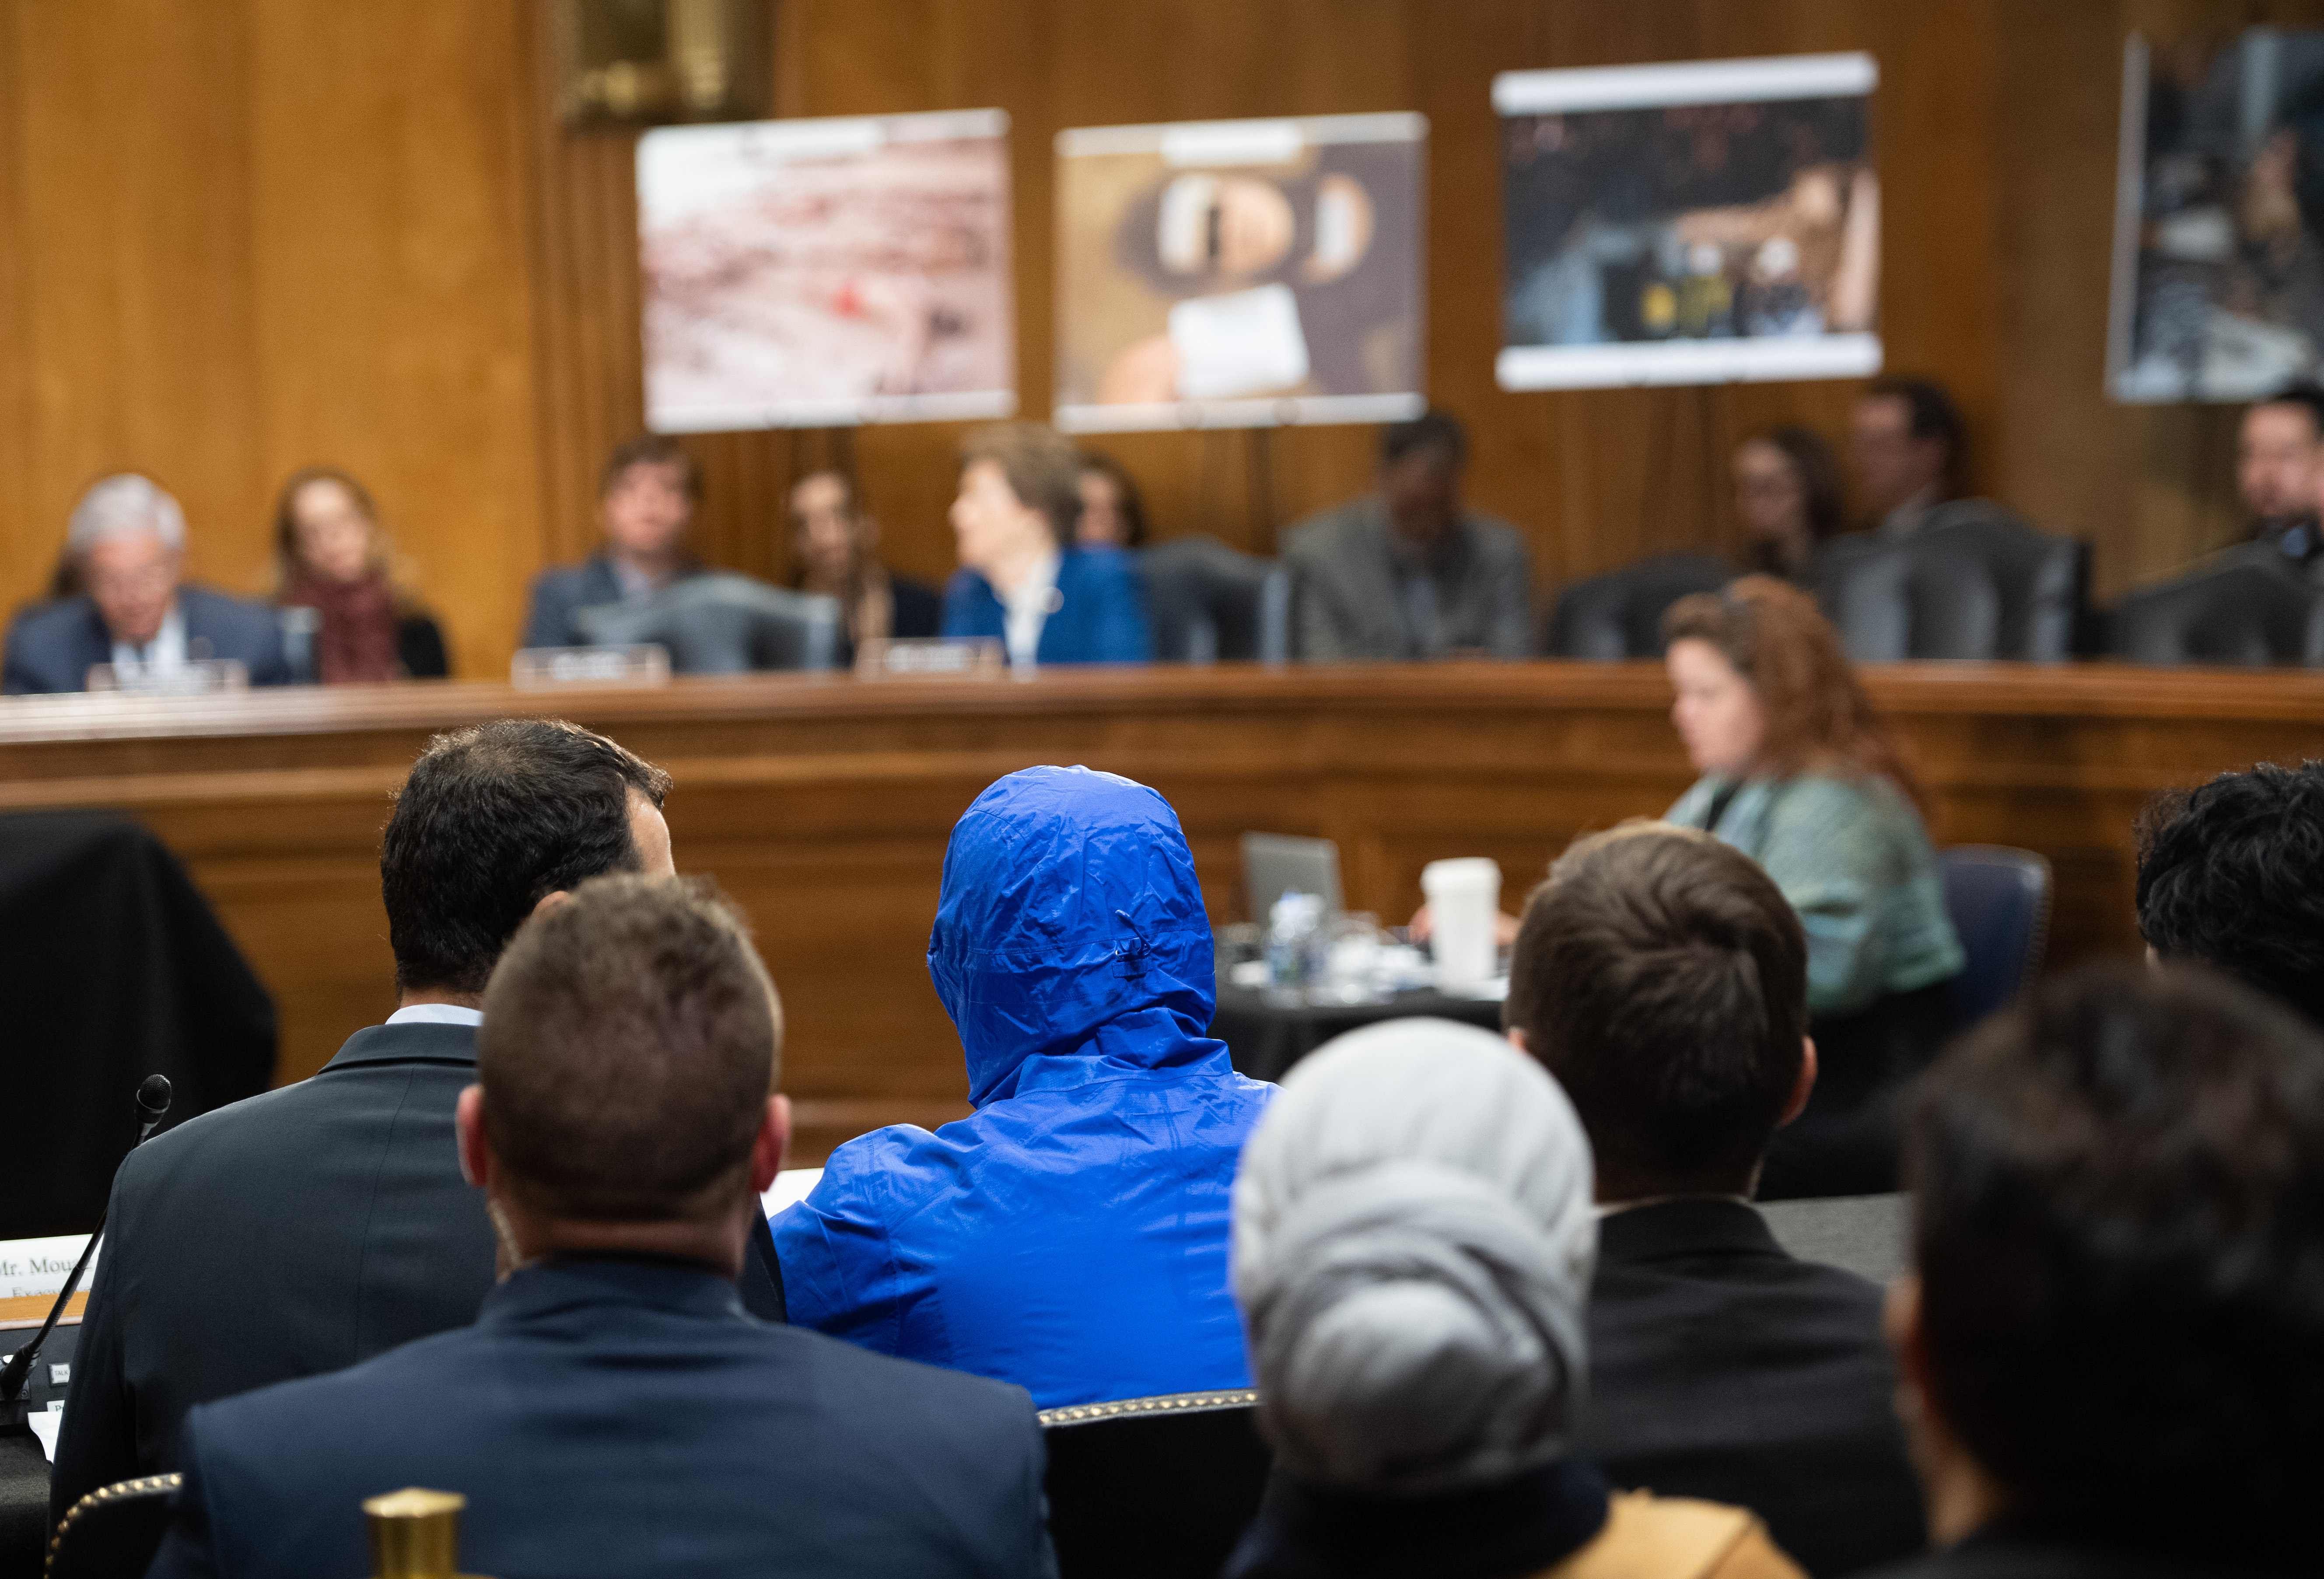 A Syrian military defector using the pseudonym Caesar, while also wearing a hood to protect his identity, testifies about the war in Syria during a Senate Foreign Relations committee hearing on Capitol Hill in Washington. (Credit: AFP)